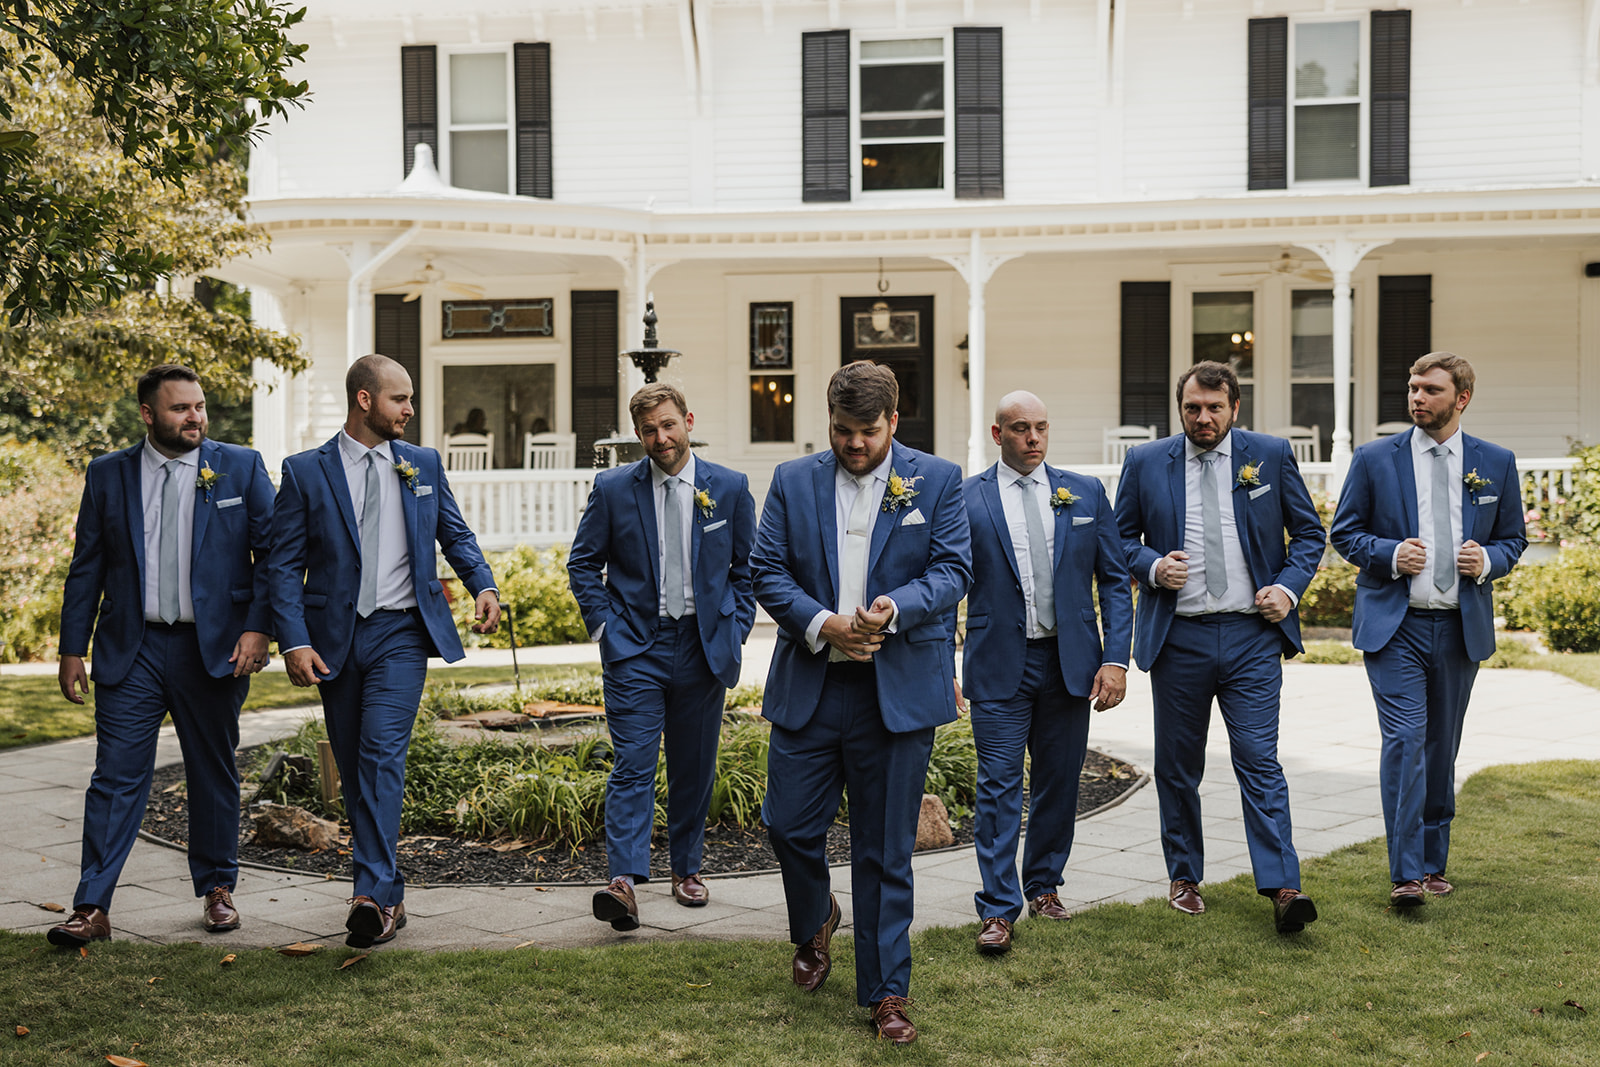 Groomsmen pose for a picture together outside Wildflower 301